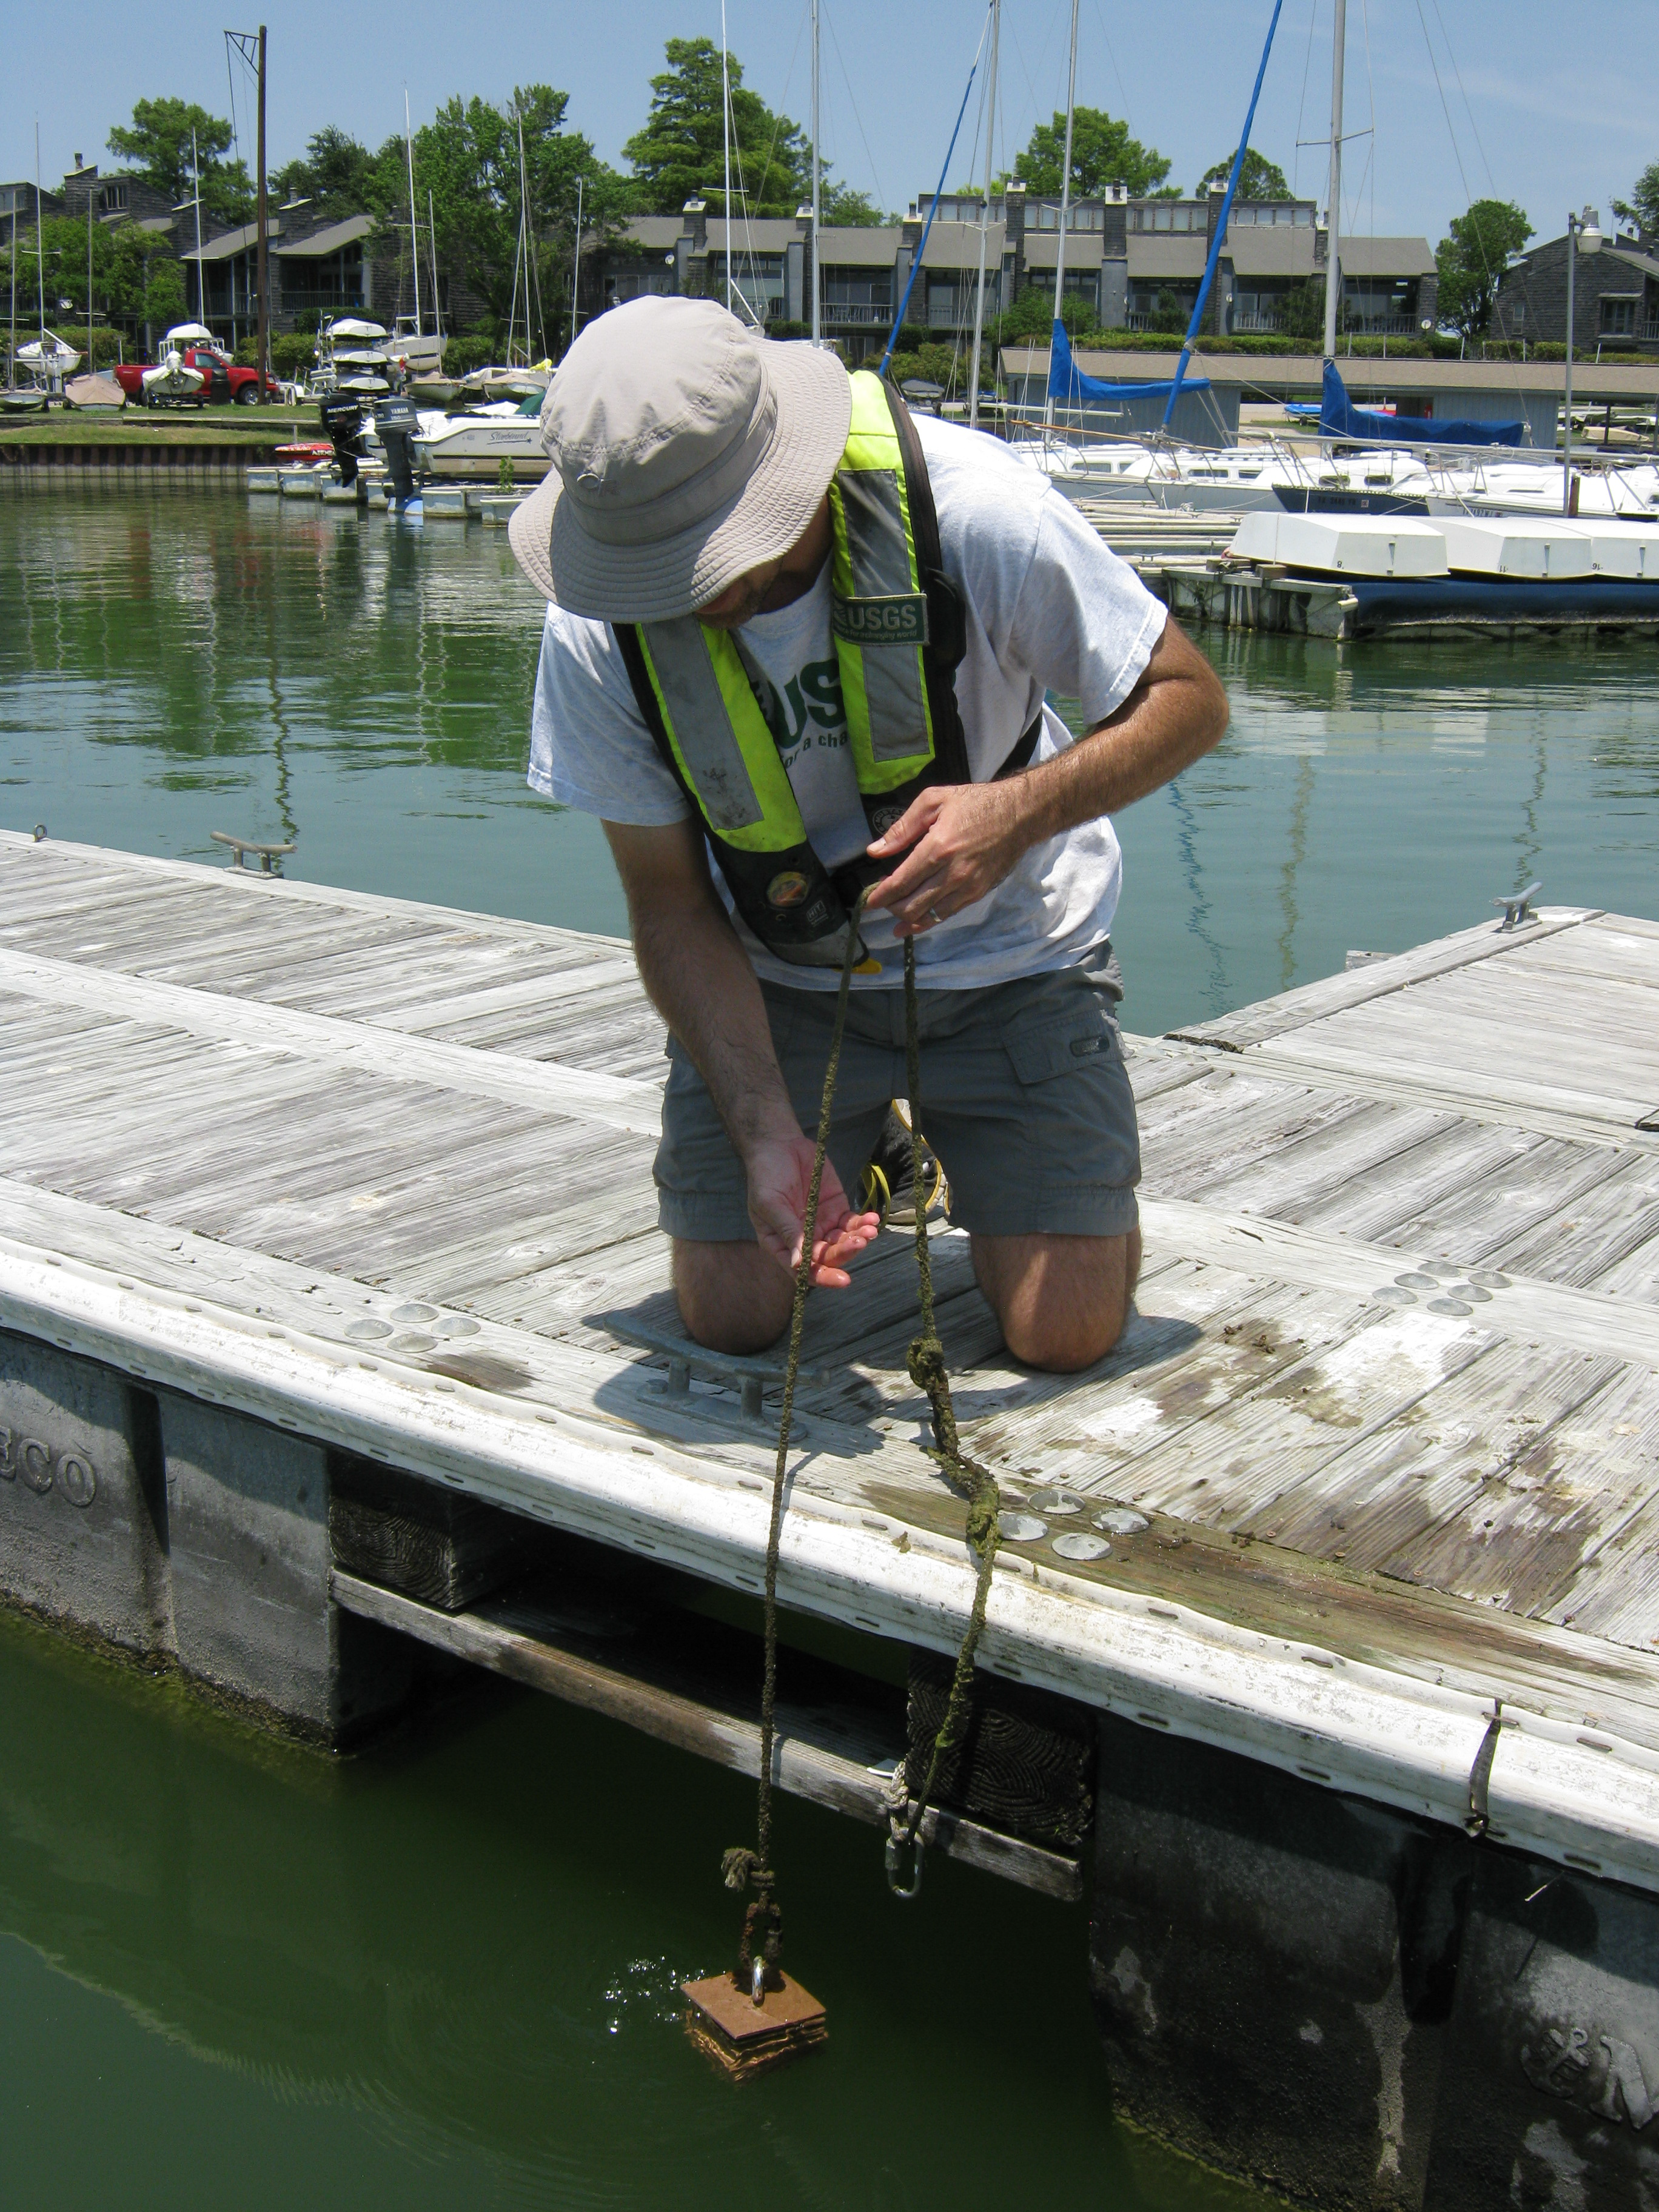 USGS scientist lowering artificial substrate into the lake